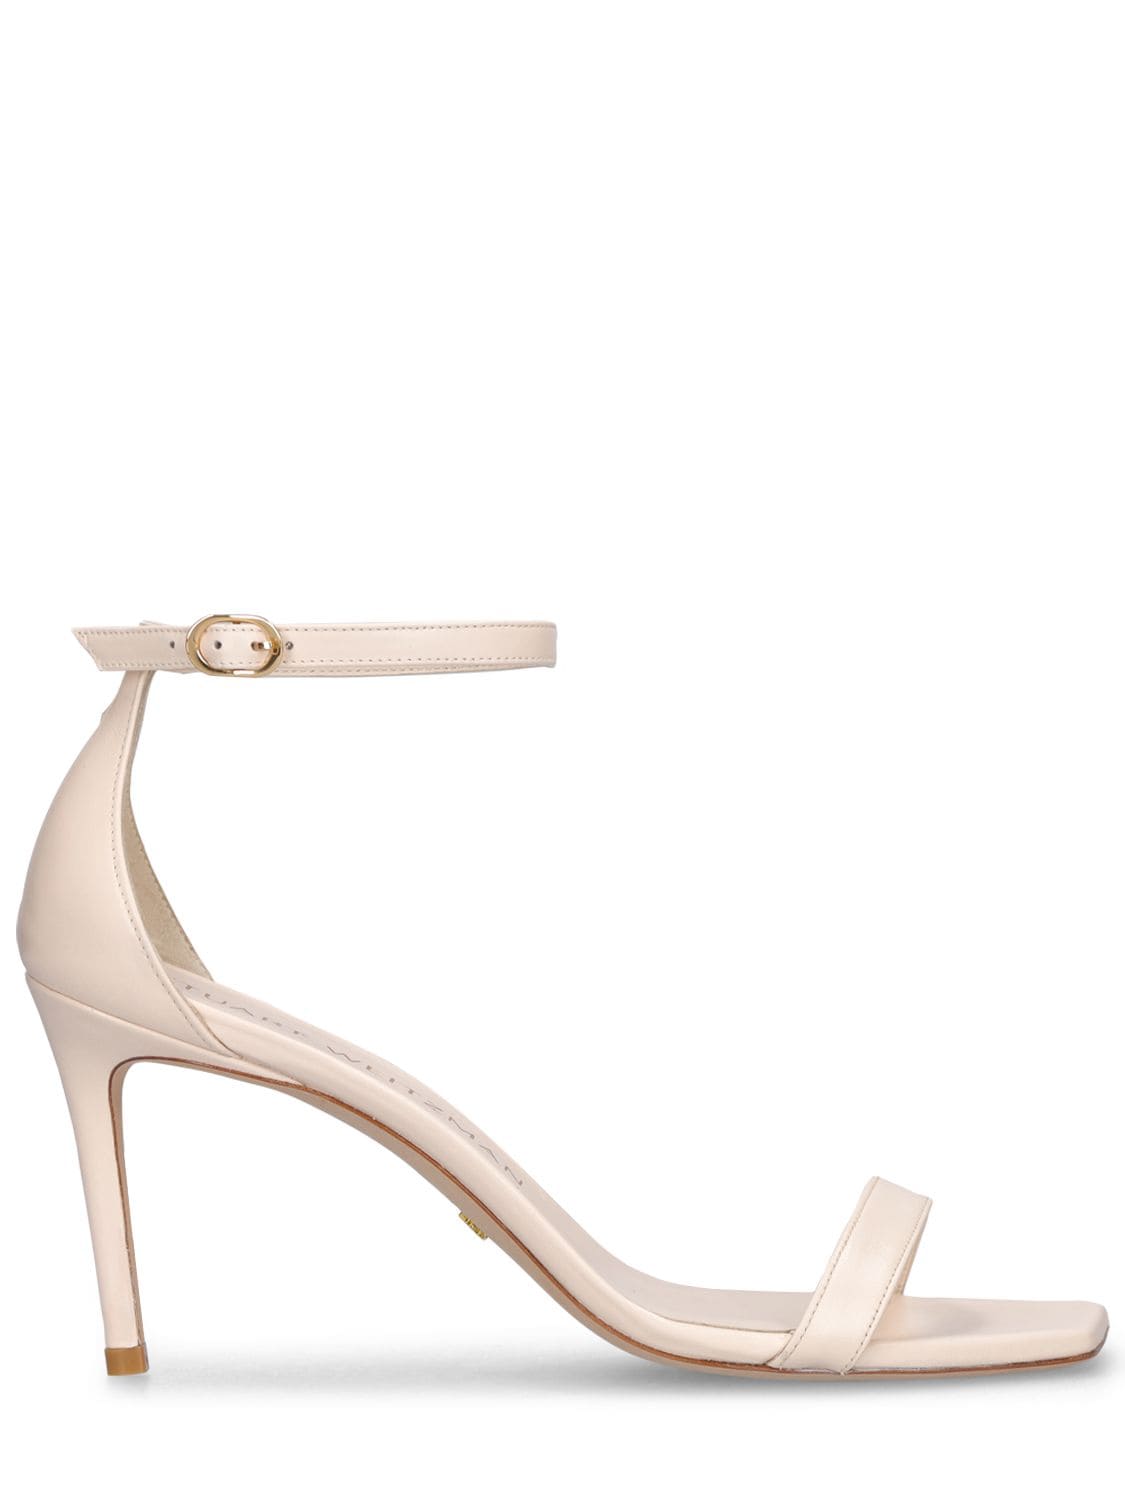 Shop Stuart Weitzman 85mm Nunaked Curve Leather Sandals In Off-white